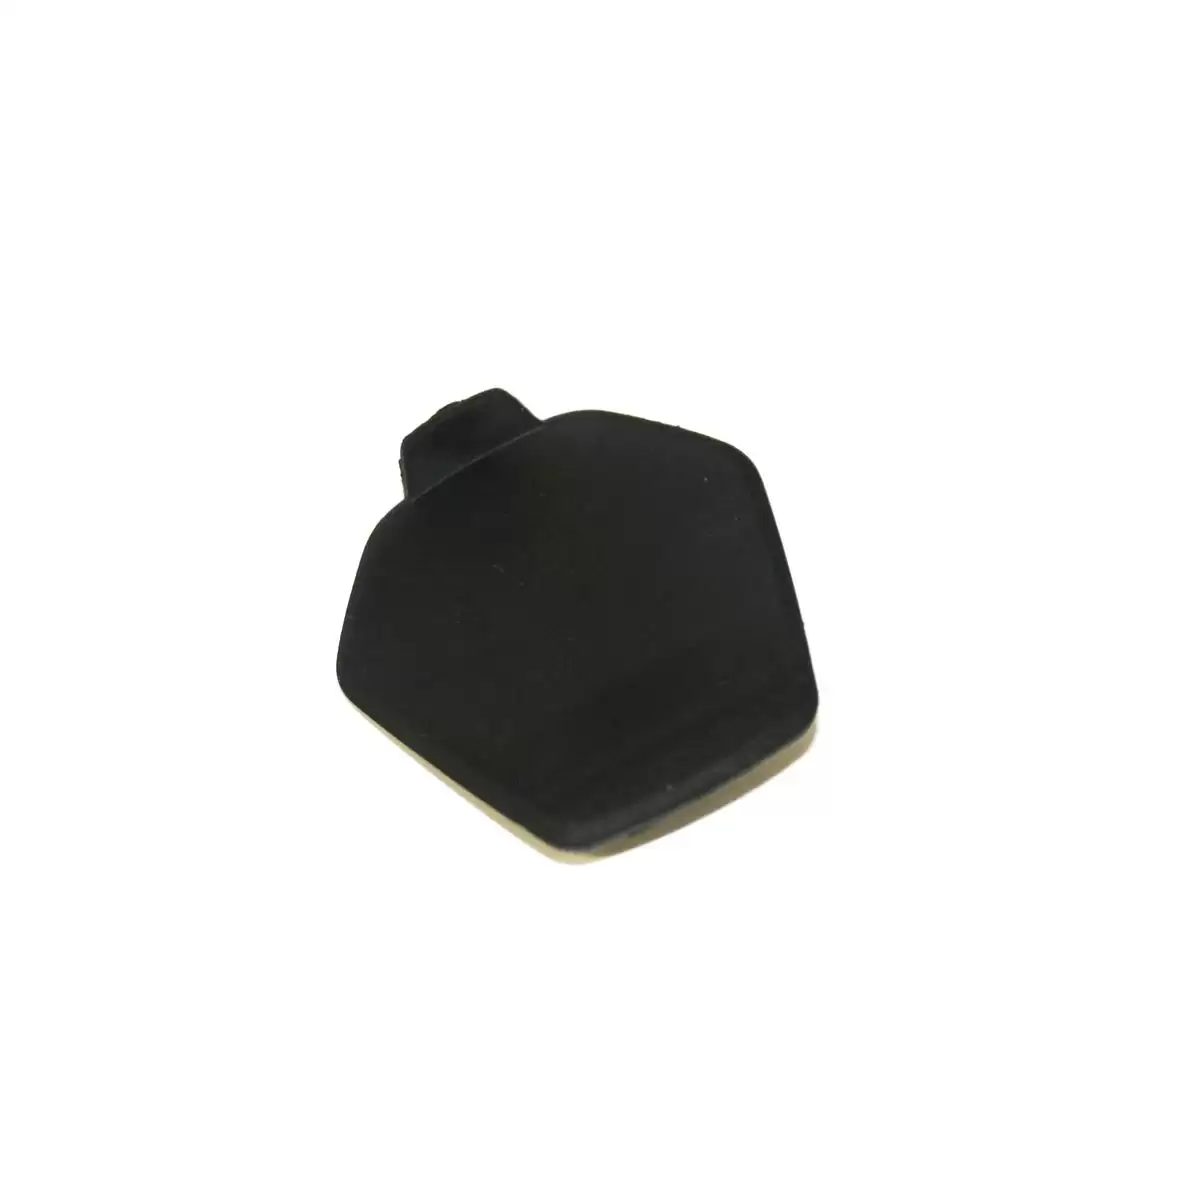 Rubber cover for charging port for Thron2, Jam2 and Sam2 with Bosch engine - image